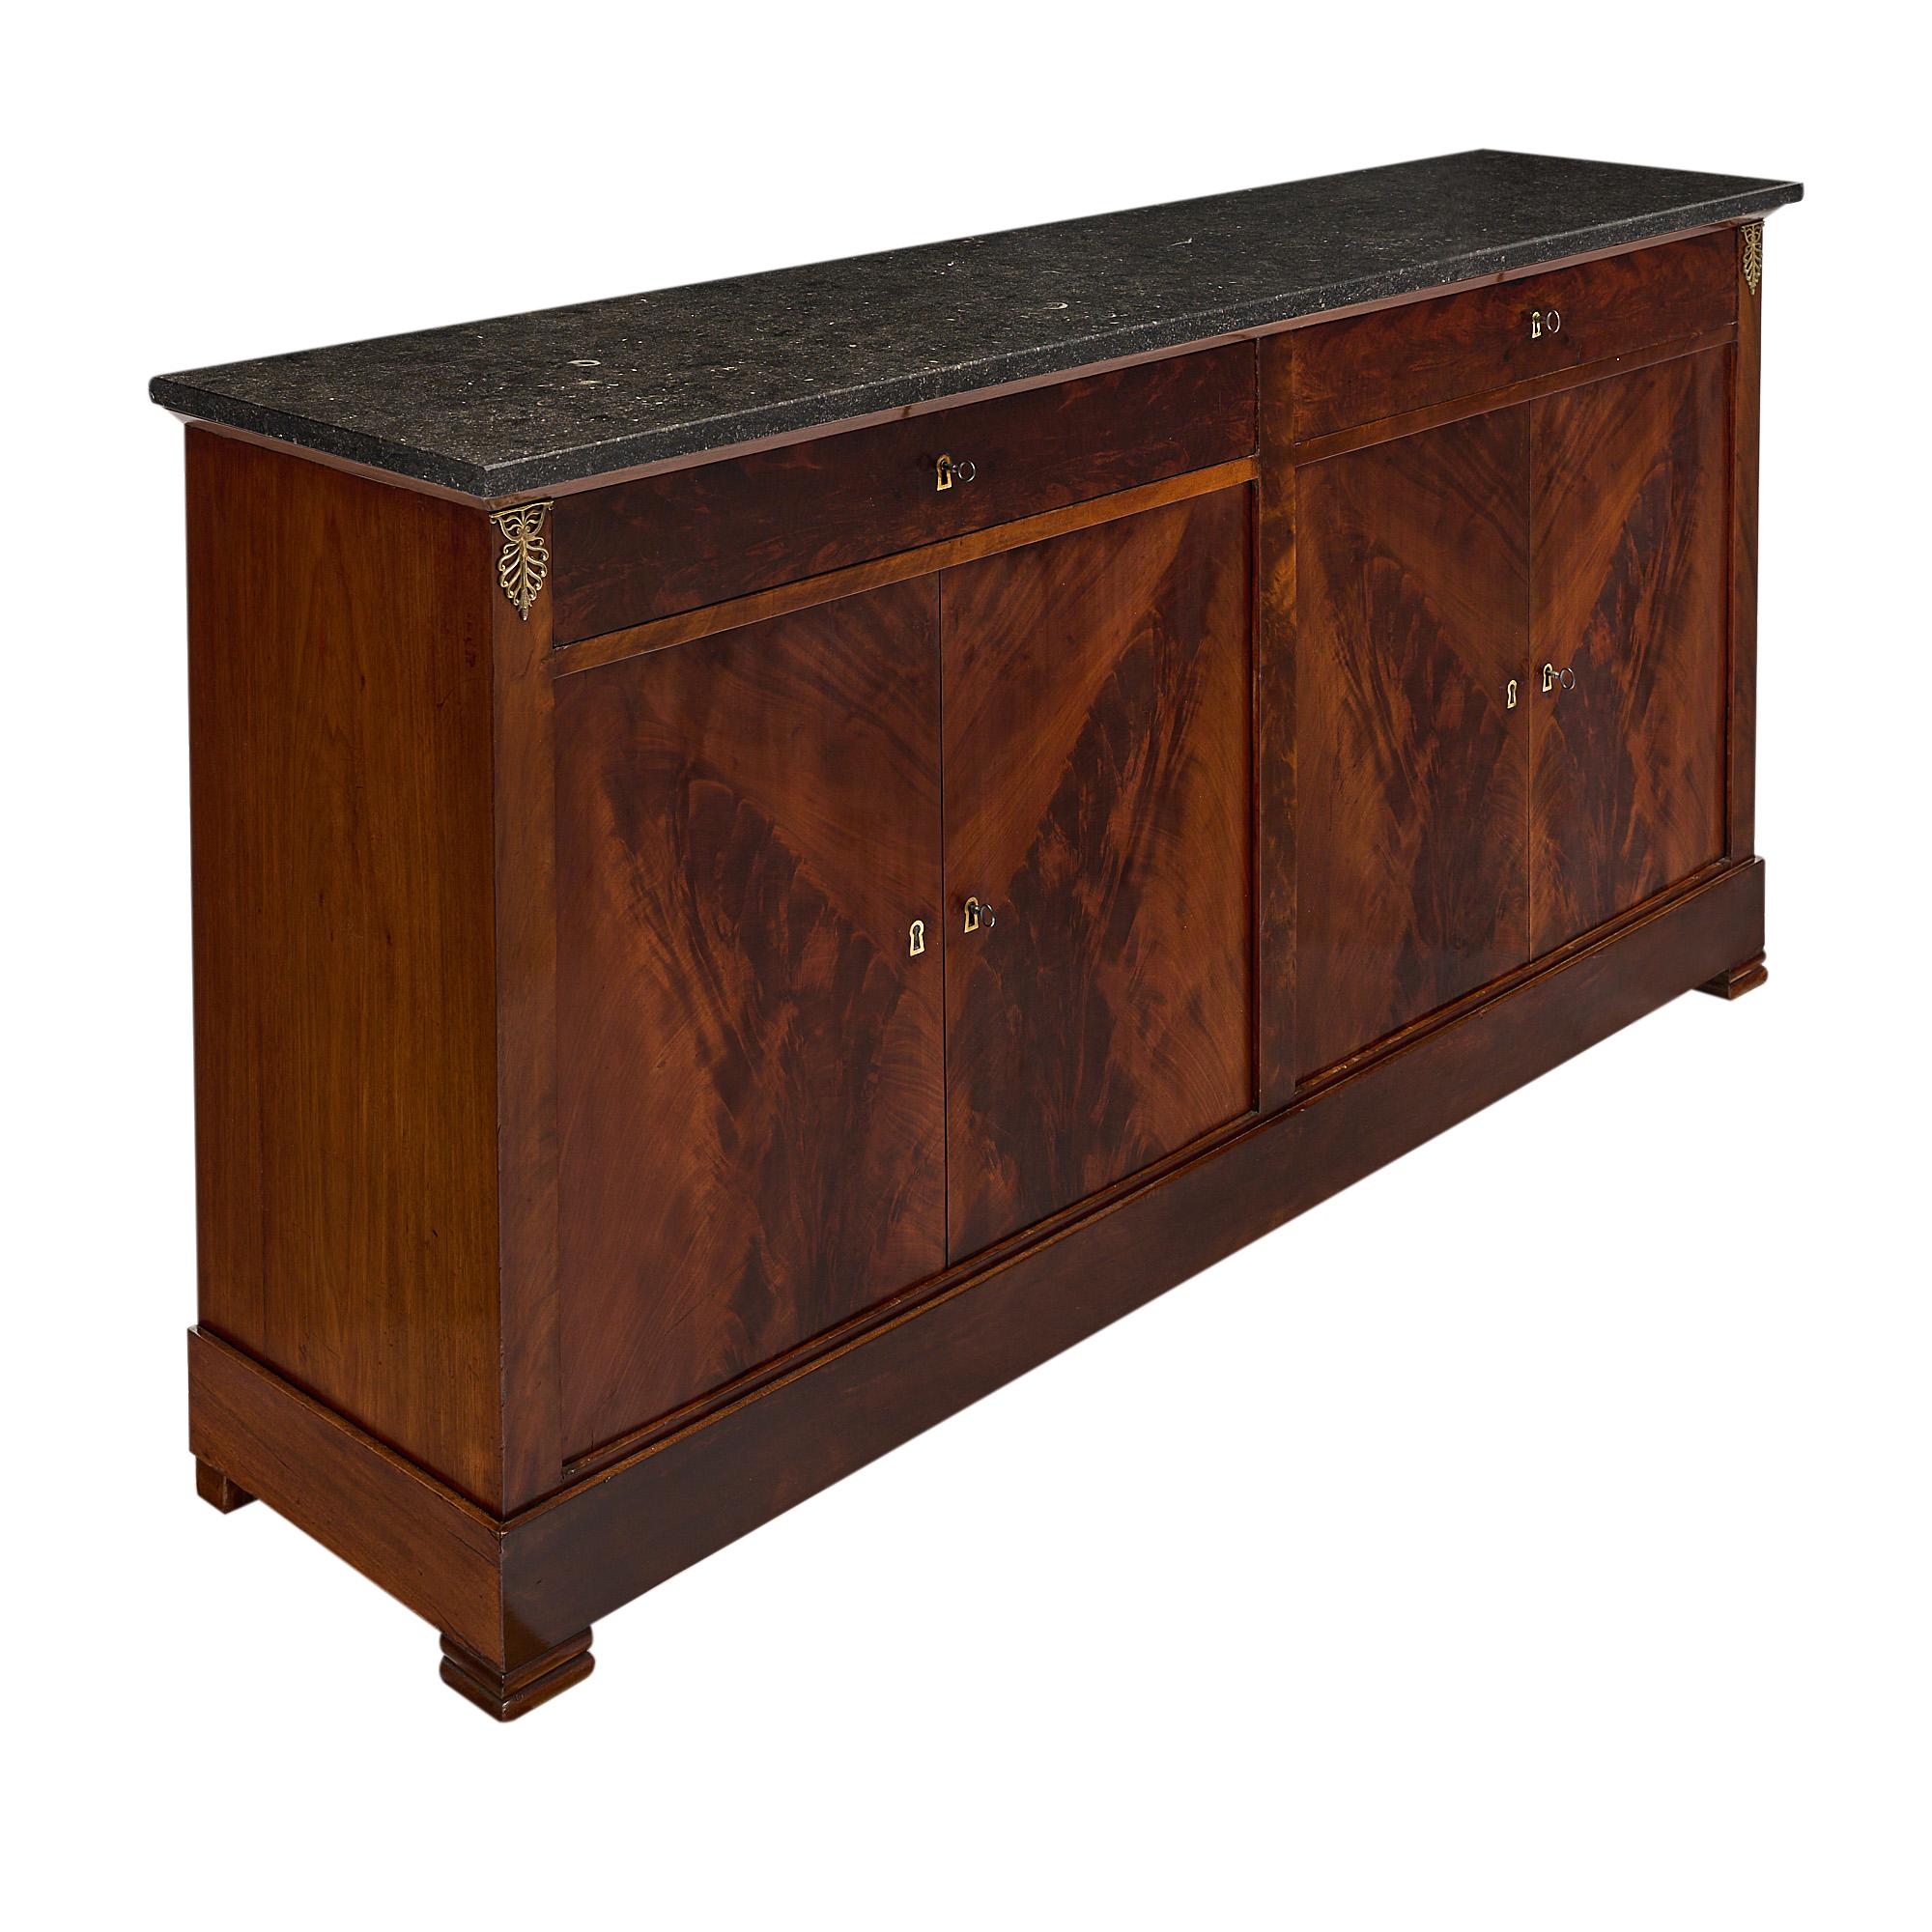 Buffet, enfilade, French, from the Restauration period. This piece is made of Cuban flamed mahogany. There are two dovetailed drawers and four doors that open to adjustable shelves. This period credenza is topped with an intact black marble slab.